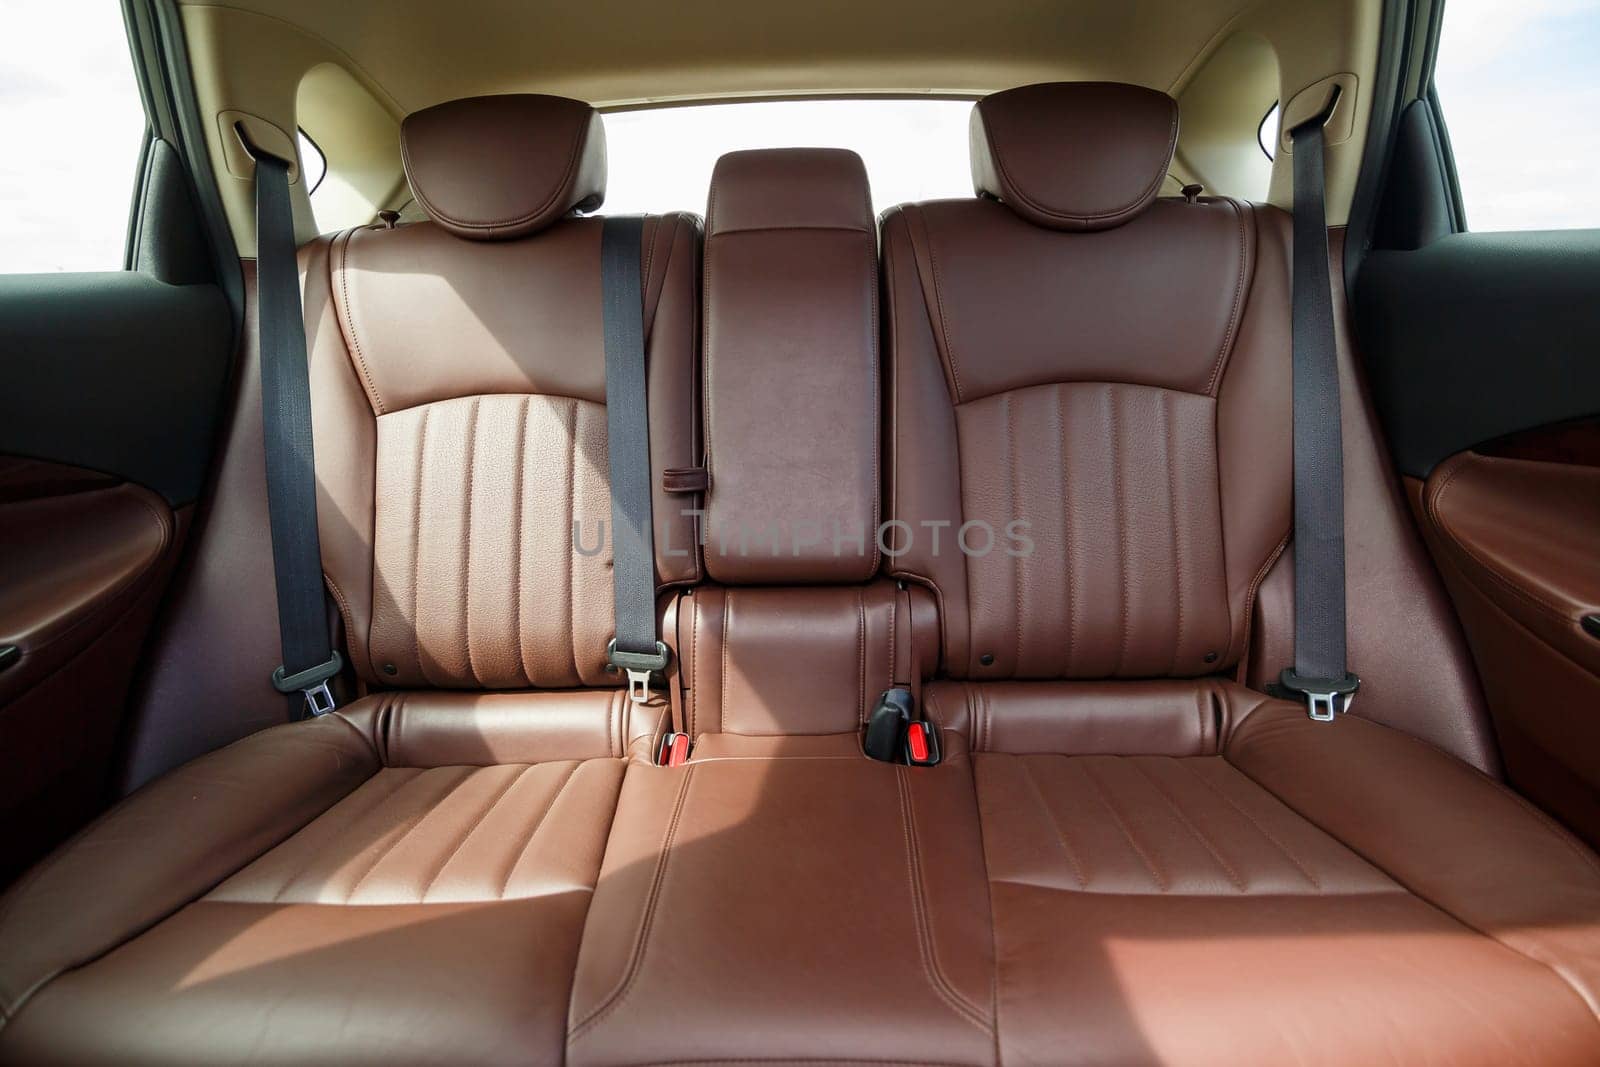 Brown leather seats in the new car. Interior upholstery with genuine leather.